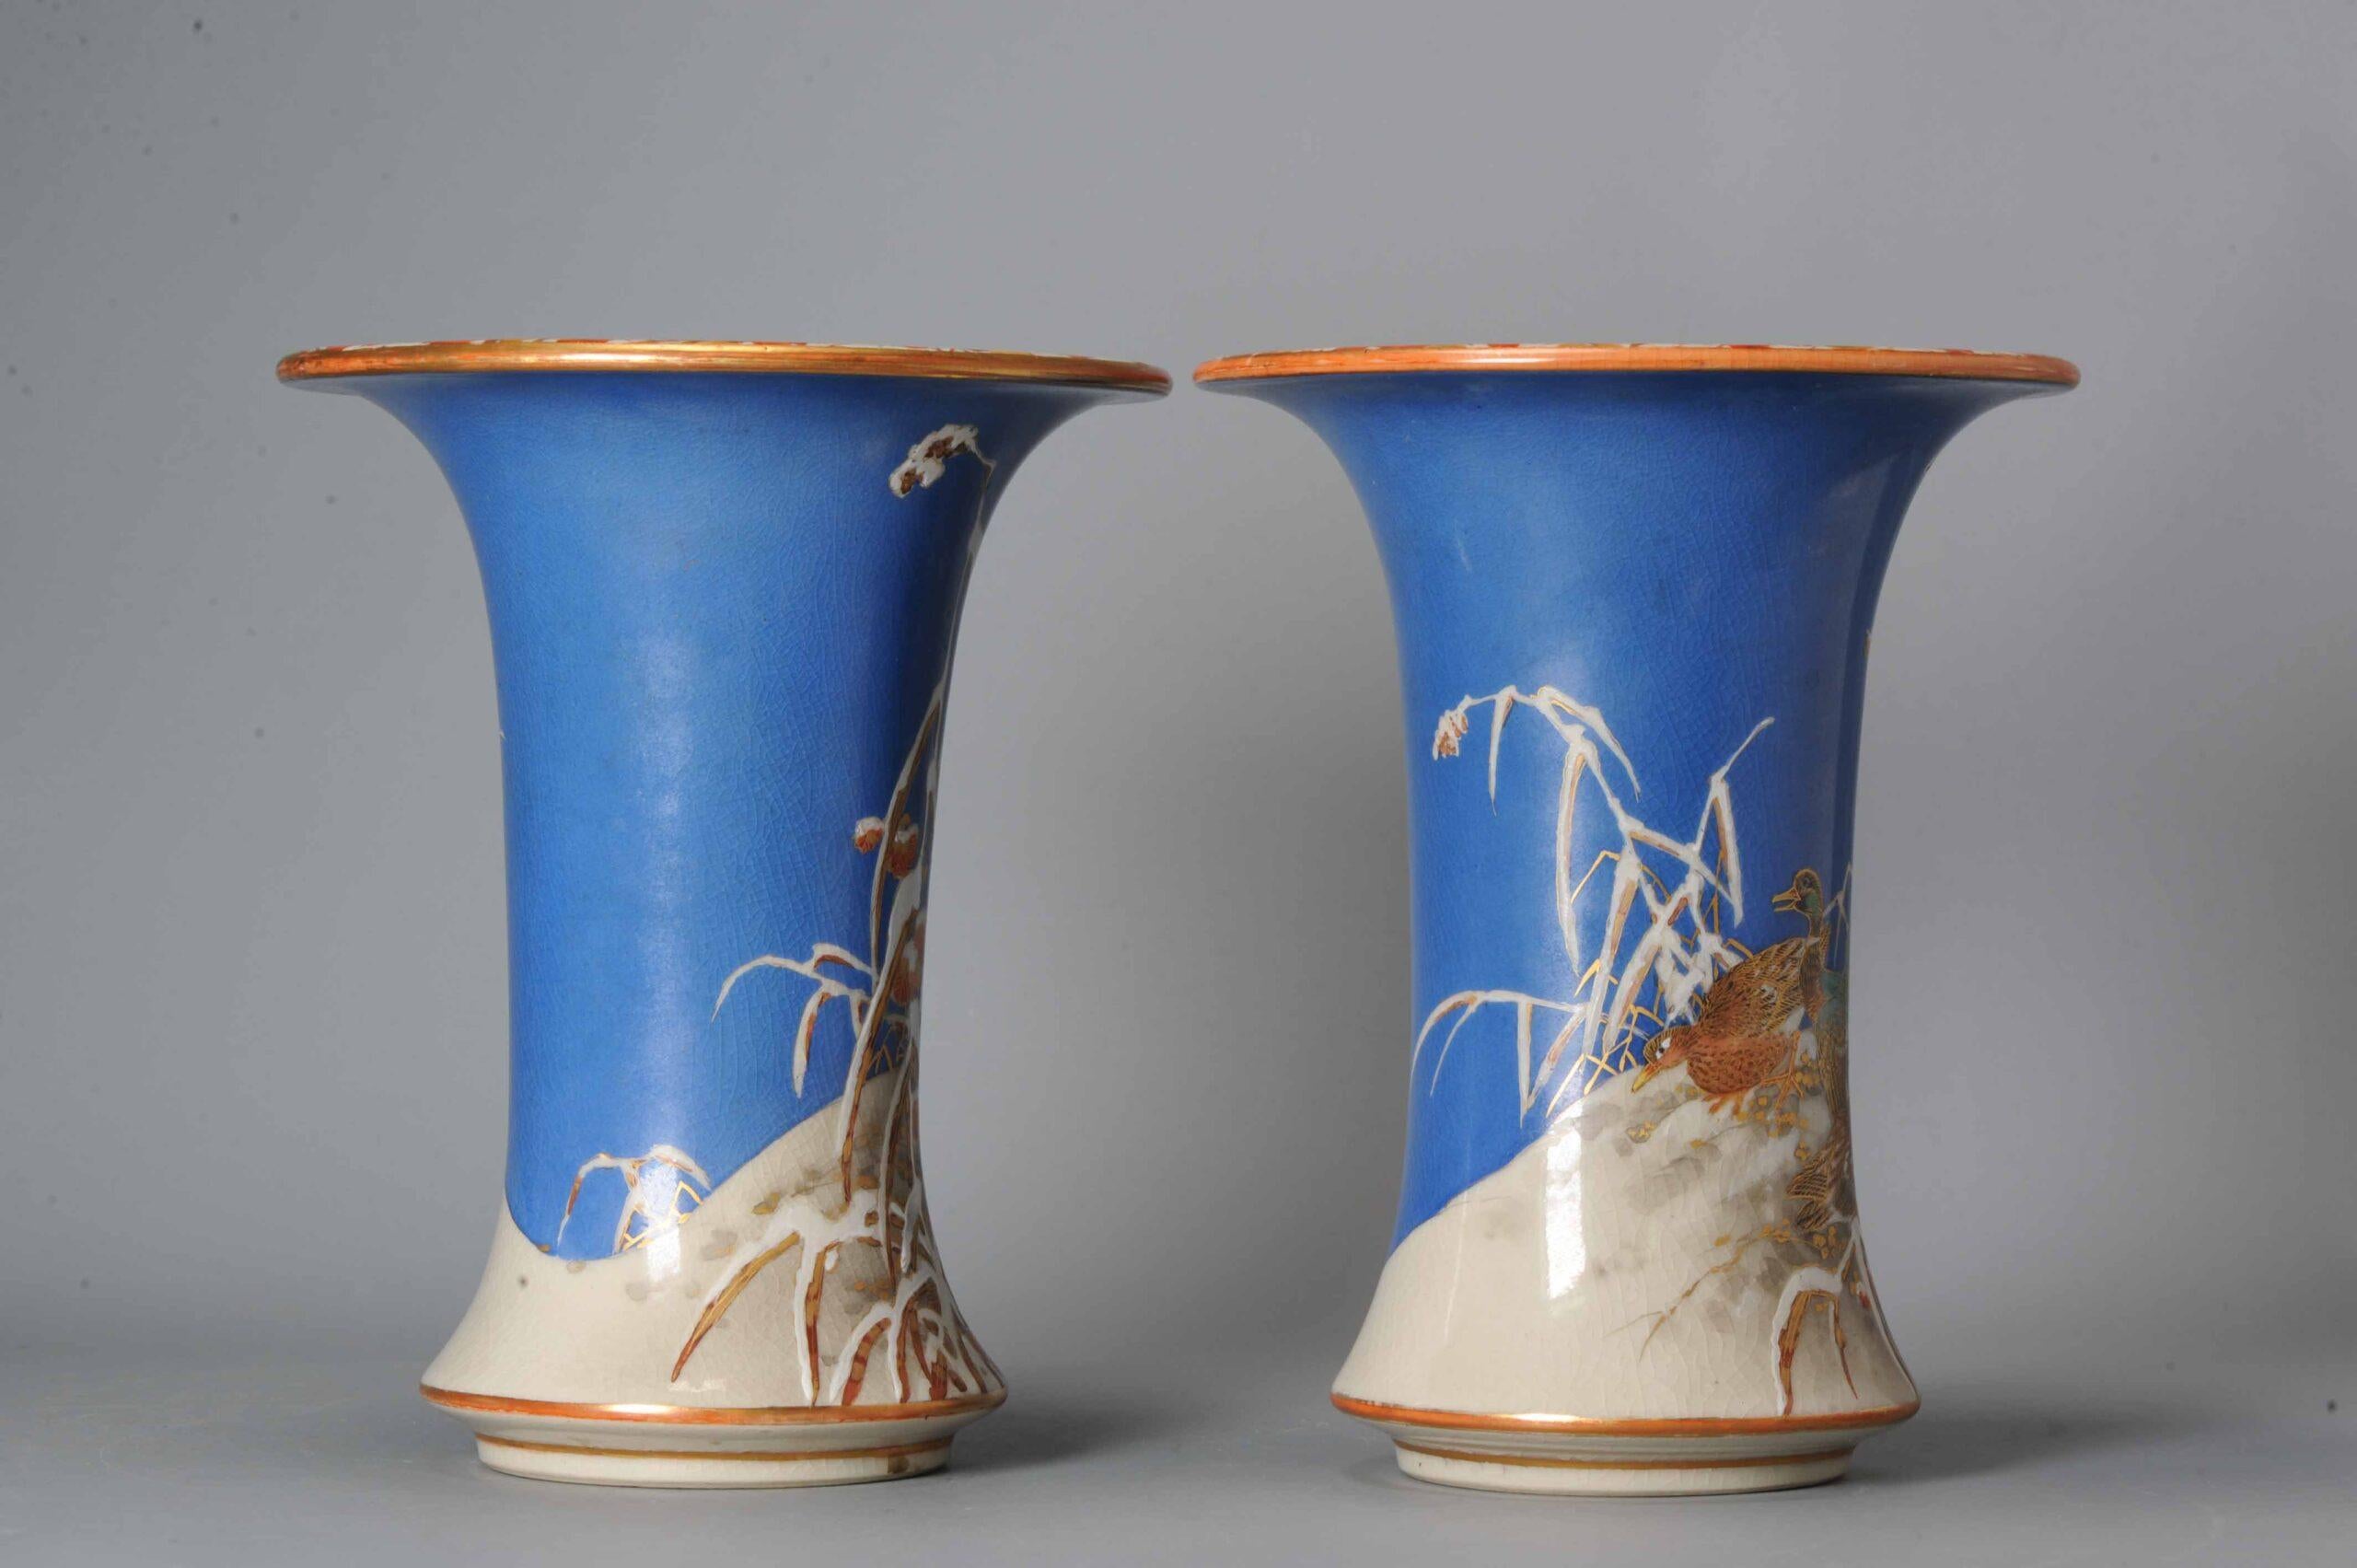 Introducing a rare and exquisite pair of Satsuma vases from the Meiji period, dating back to the 19th century. Both with an amazing winter landscape with flowers and ducks. Marked at the base.

Additional information:
Material: Porcelain &